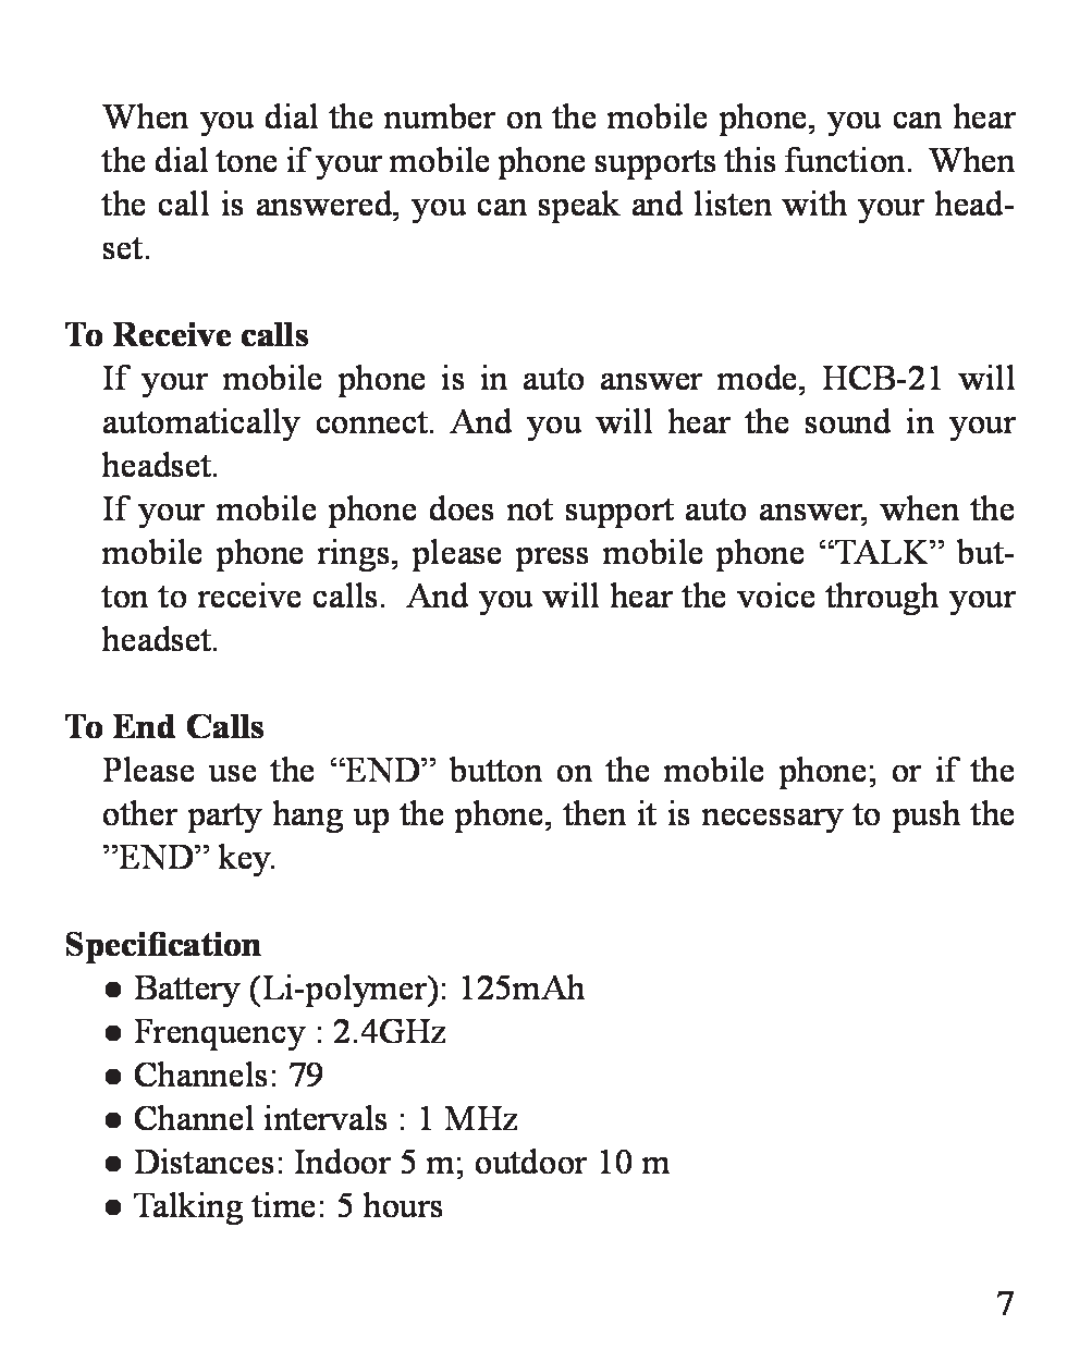 Huey Chiao HCB-21 manual To Receive calls, To End Calls, Specification 